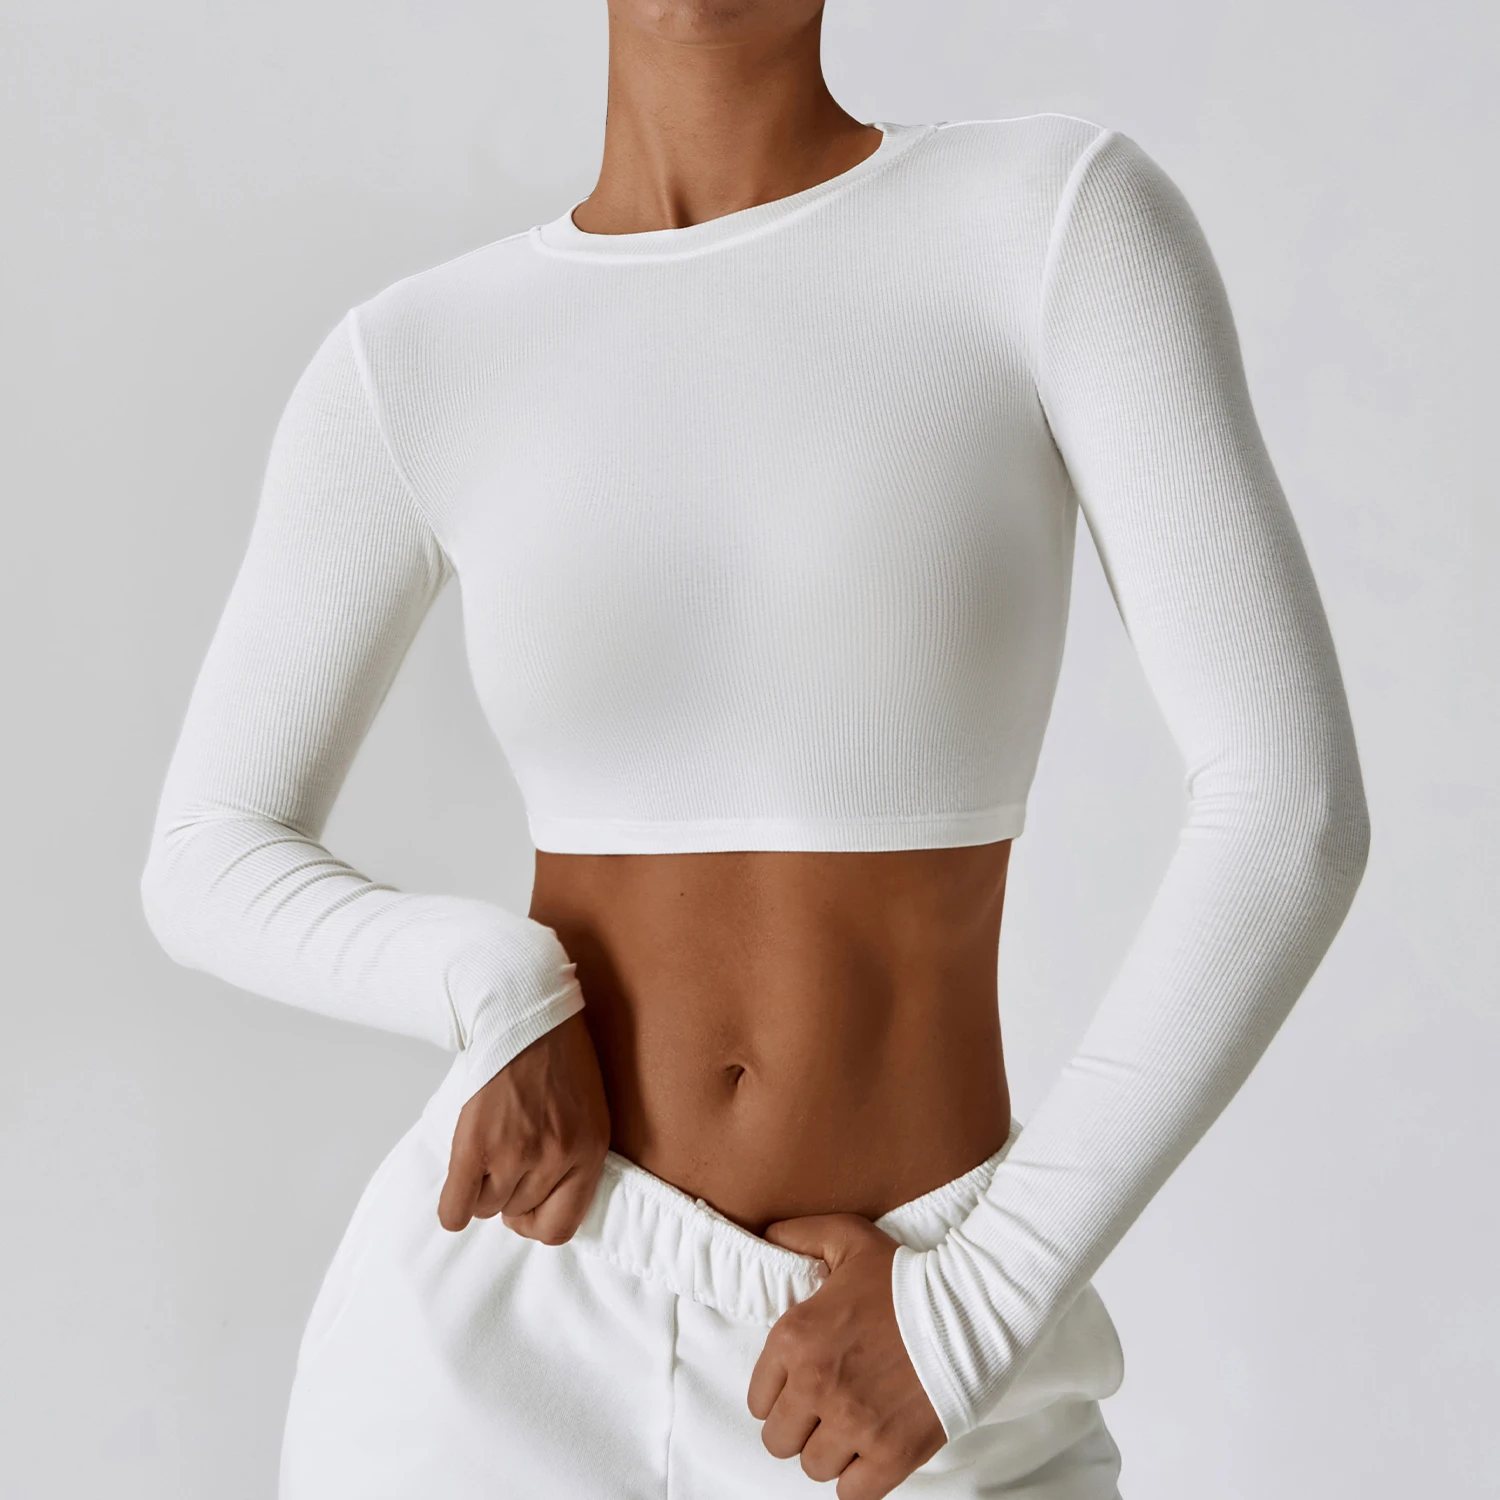 Fashion Lady Women's Classical Custom Blank Long Sleeve High Quality Ribbed Gym Fitness Gym Tops